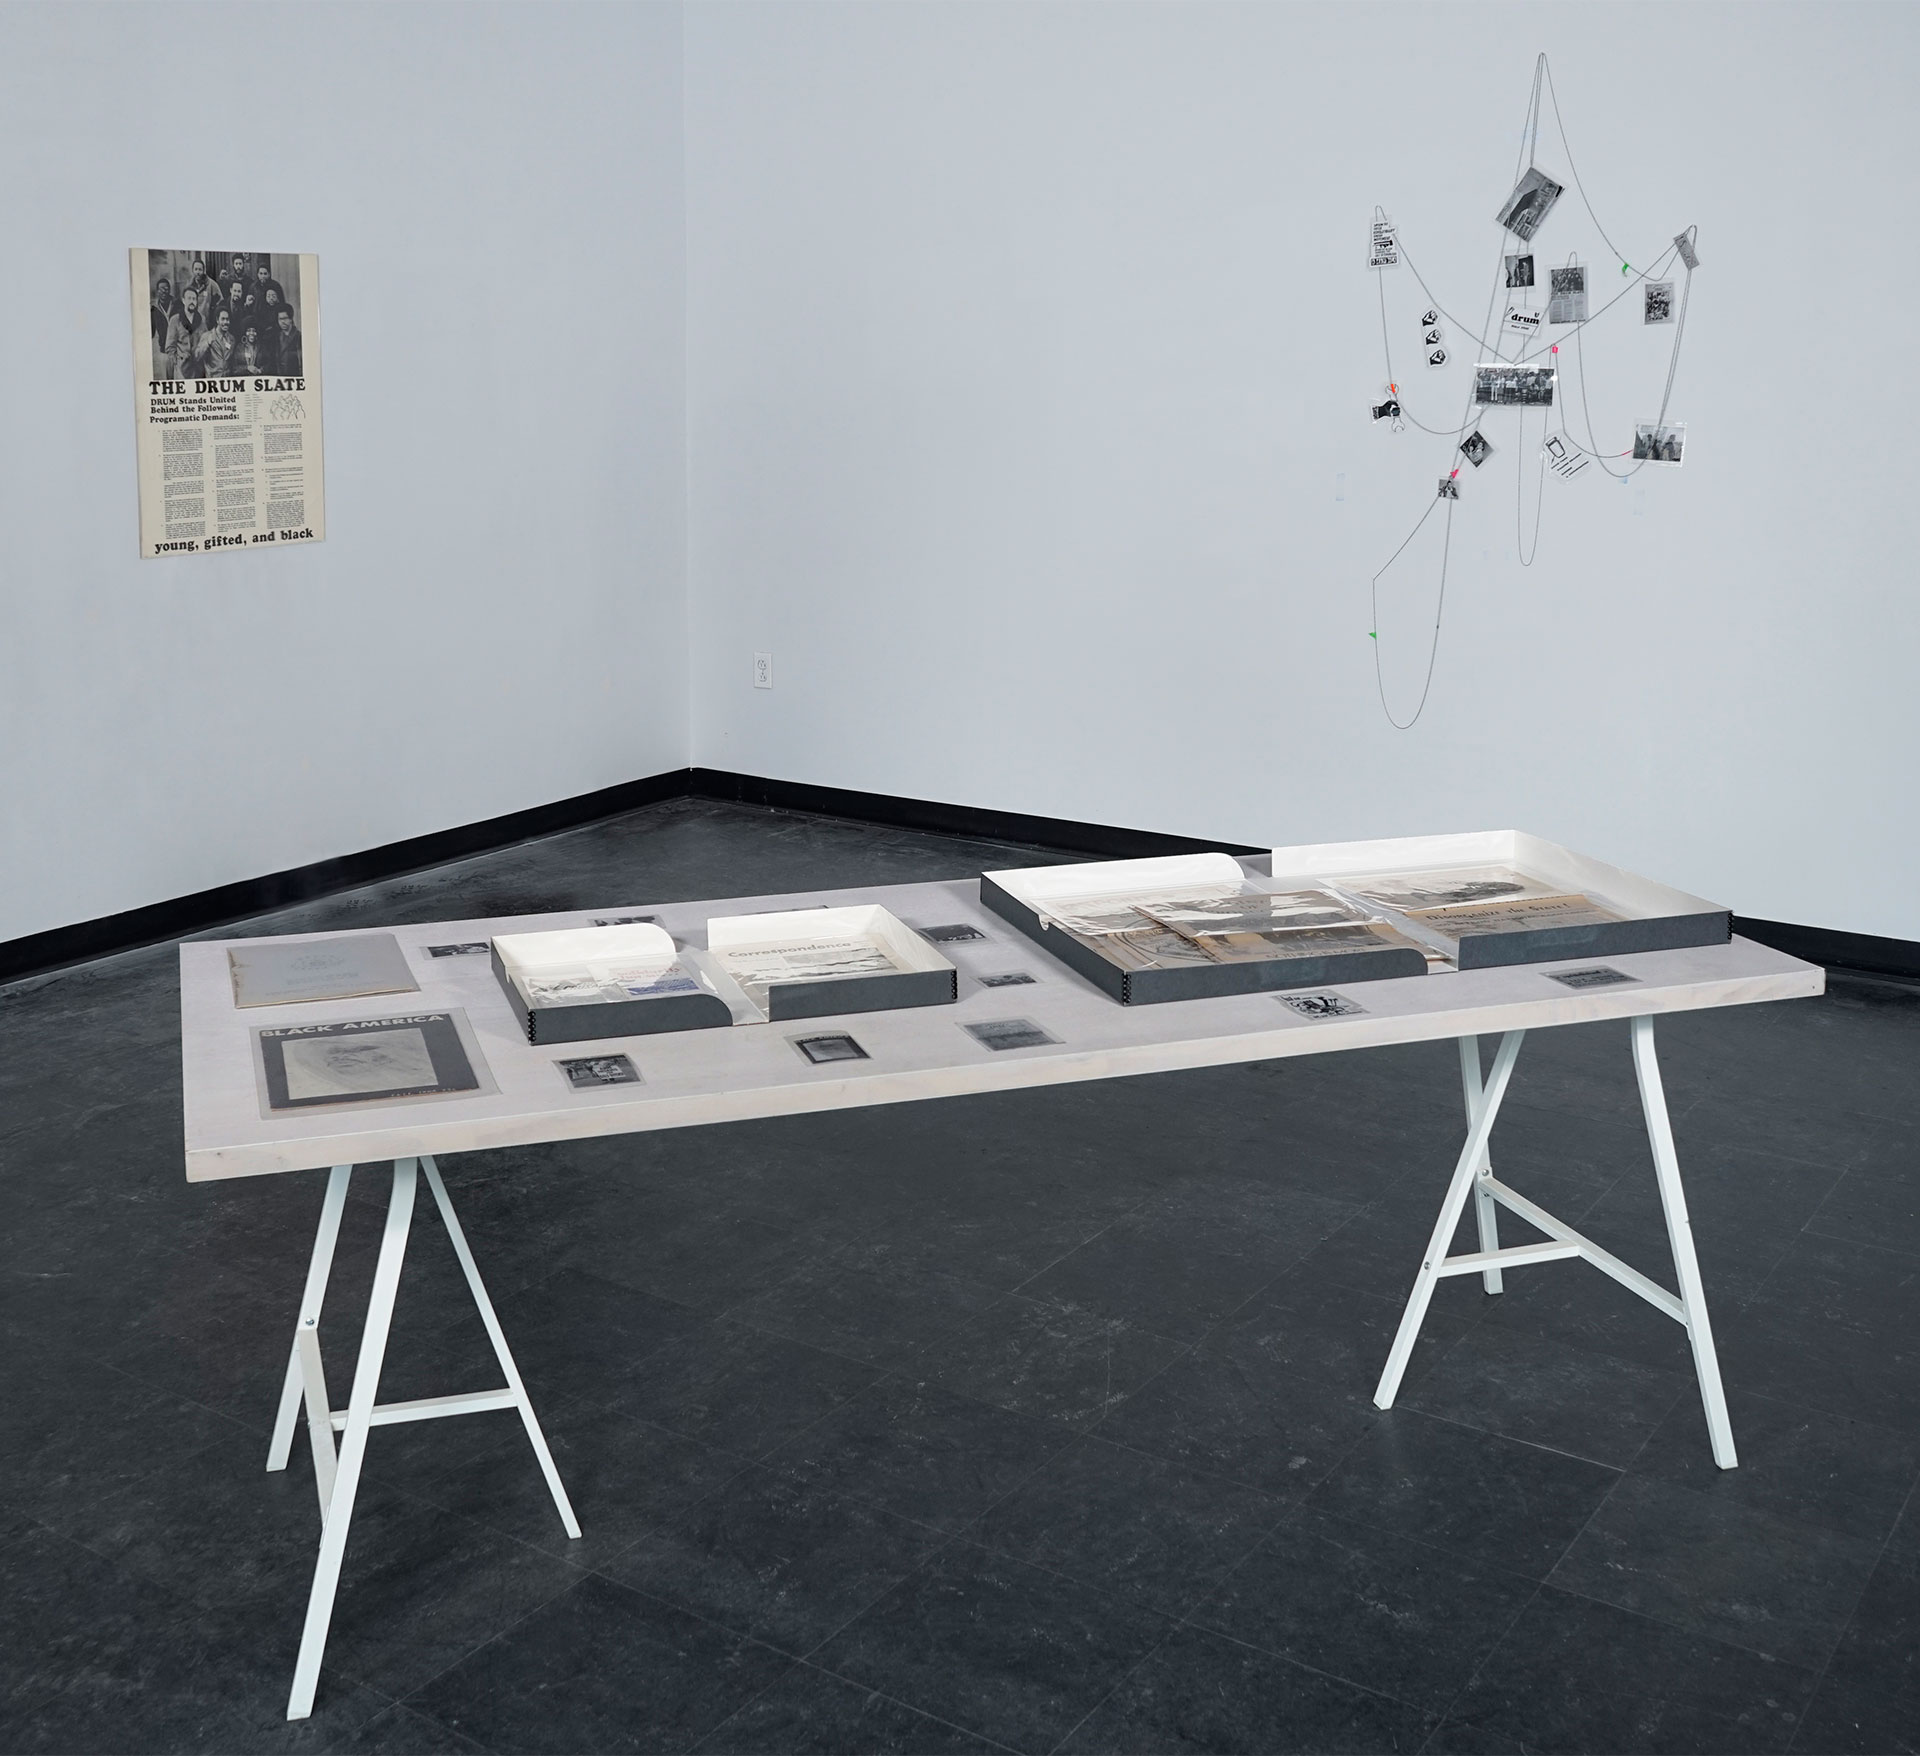 Installation view of Documents of Resistance—Our Oppressions Are Connected at the PS122 Project Space, New York, NY, 2020 © Antonio Serna